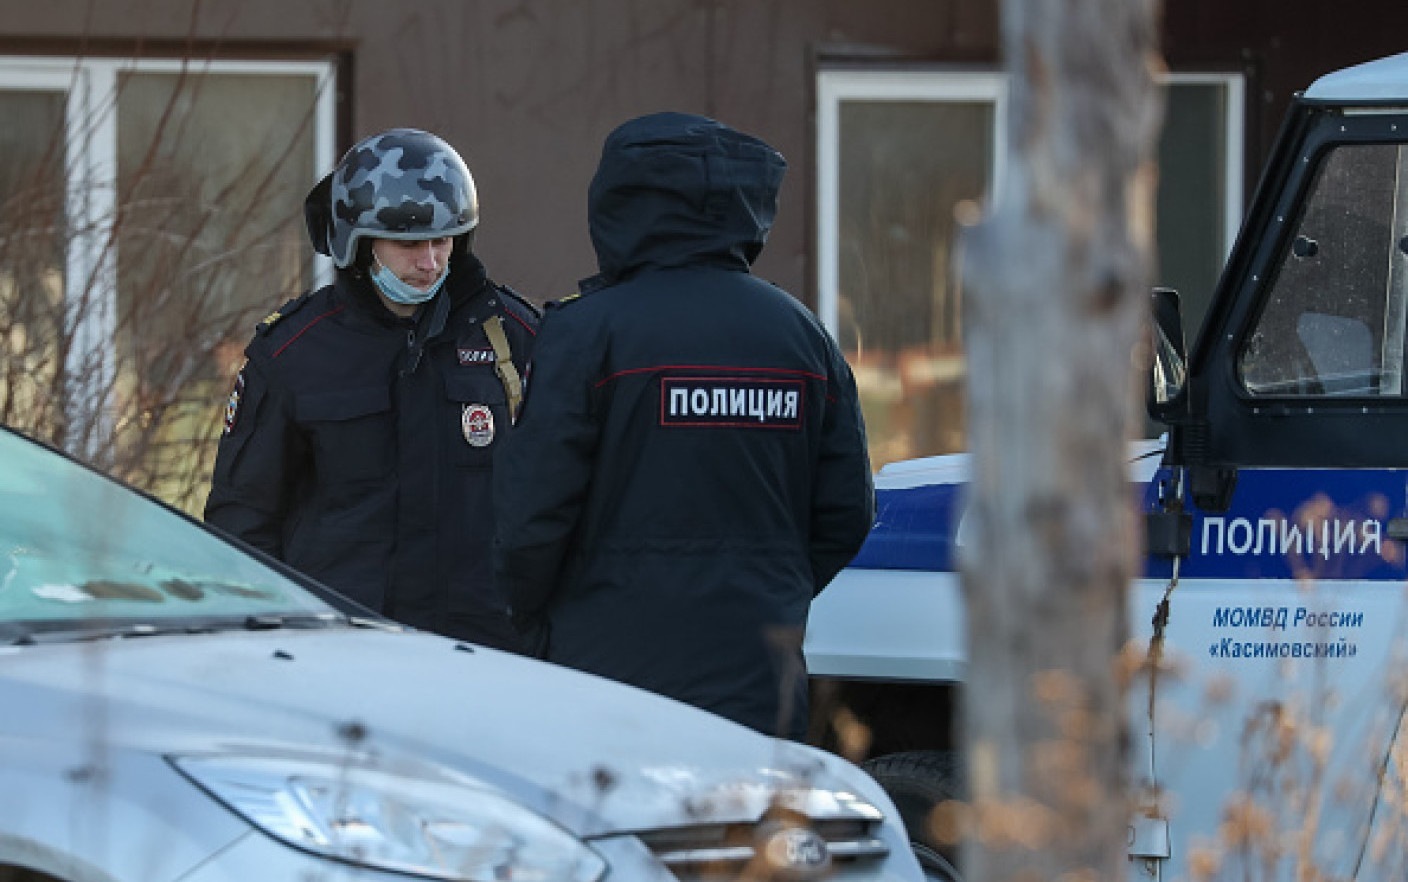 The incident was recorded in Yelatma, a Russian village about 200 kilometers from Moscow.